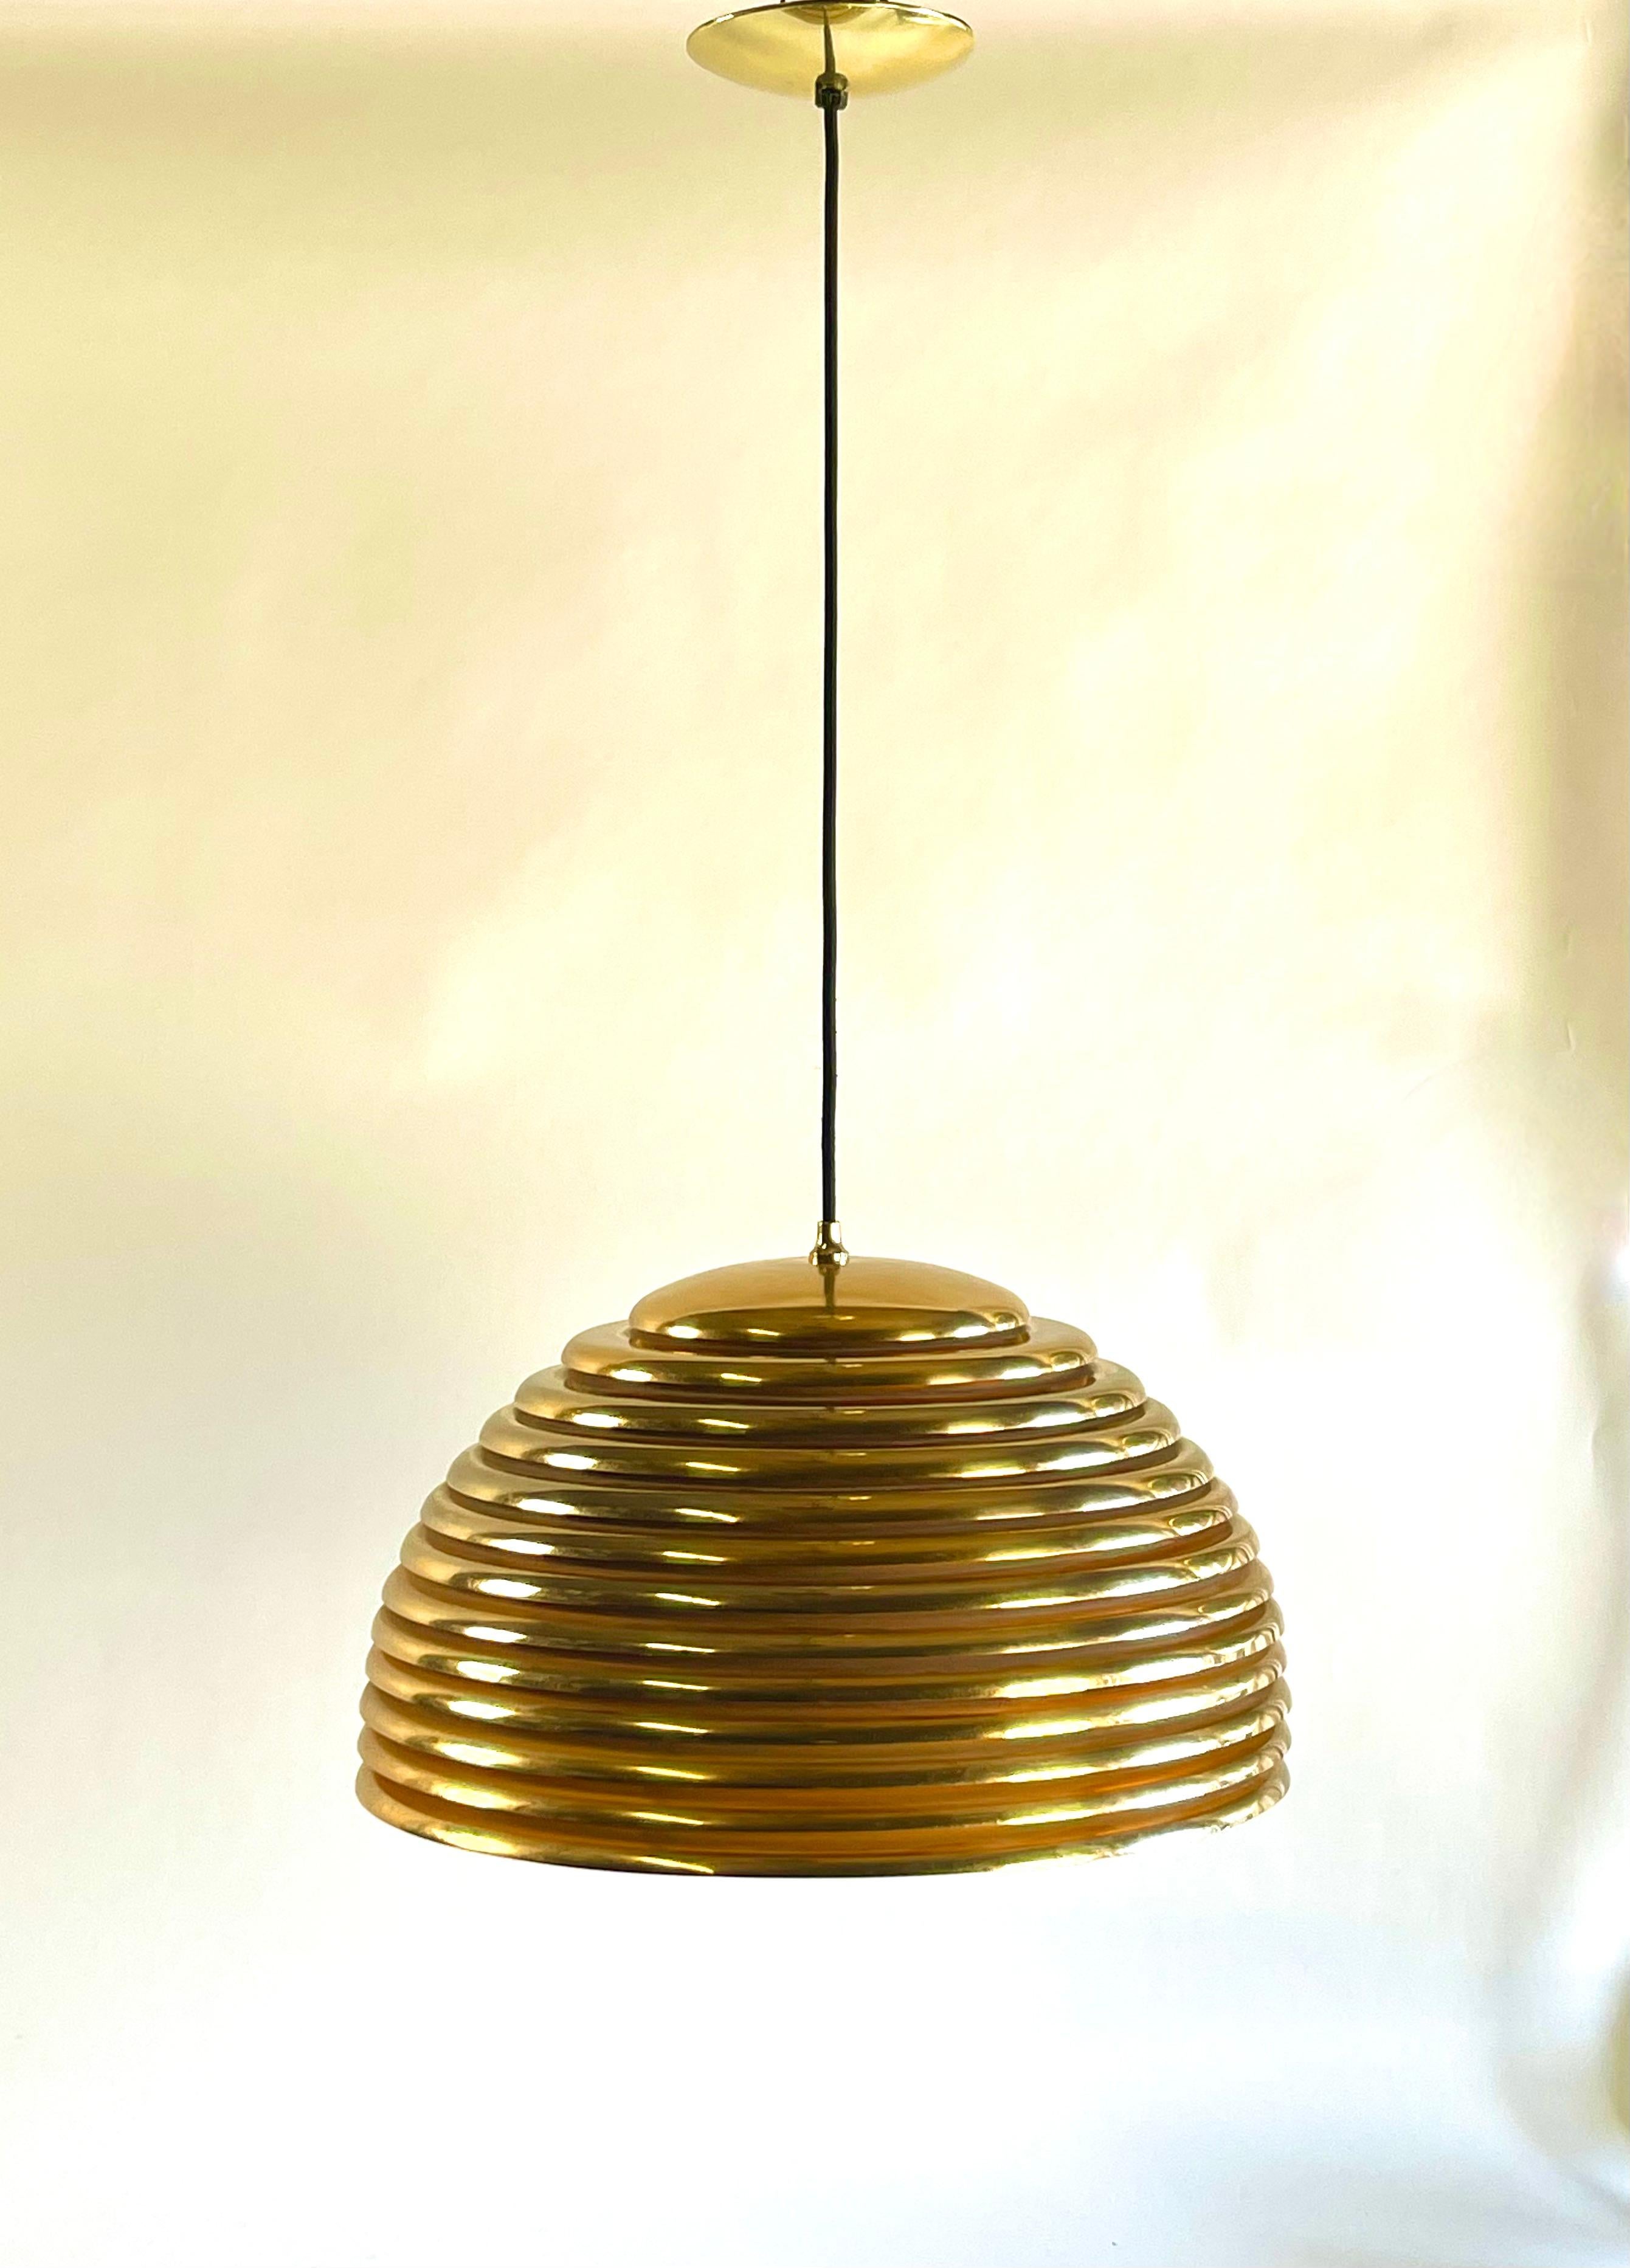 Beautiful and Rare Golden Saturno pendant lamp designed by Kazuo Motozawa early 1970s for Staff. Brass metal construction this is the large version 
Made in Germany

Lamp has been rewired with a 6 ft.
Lamp has four lights inside.

